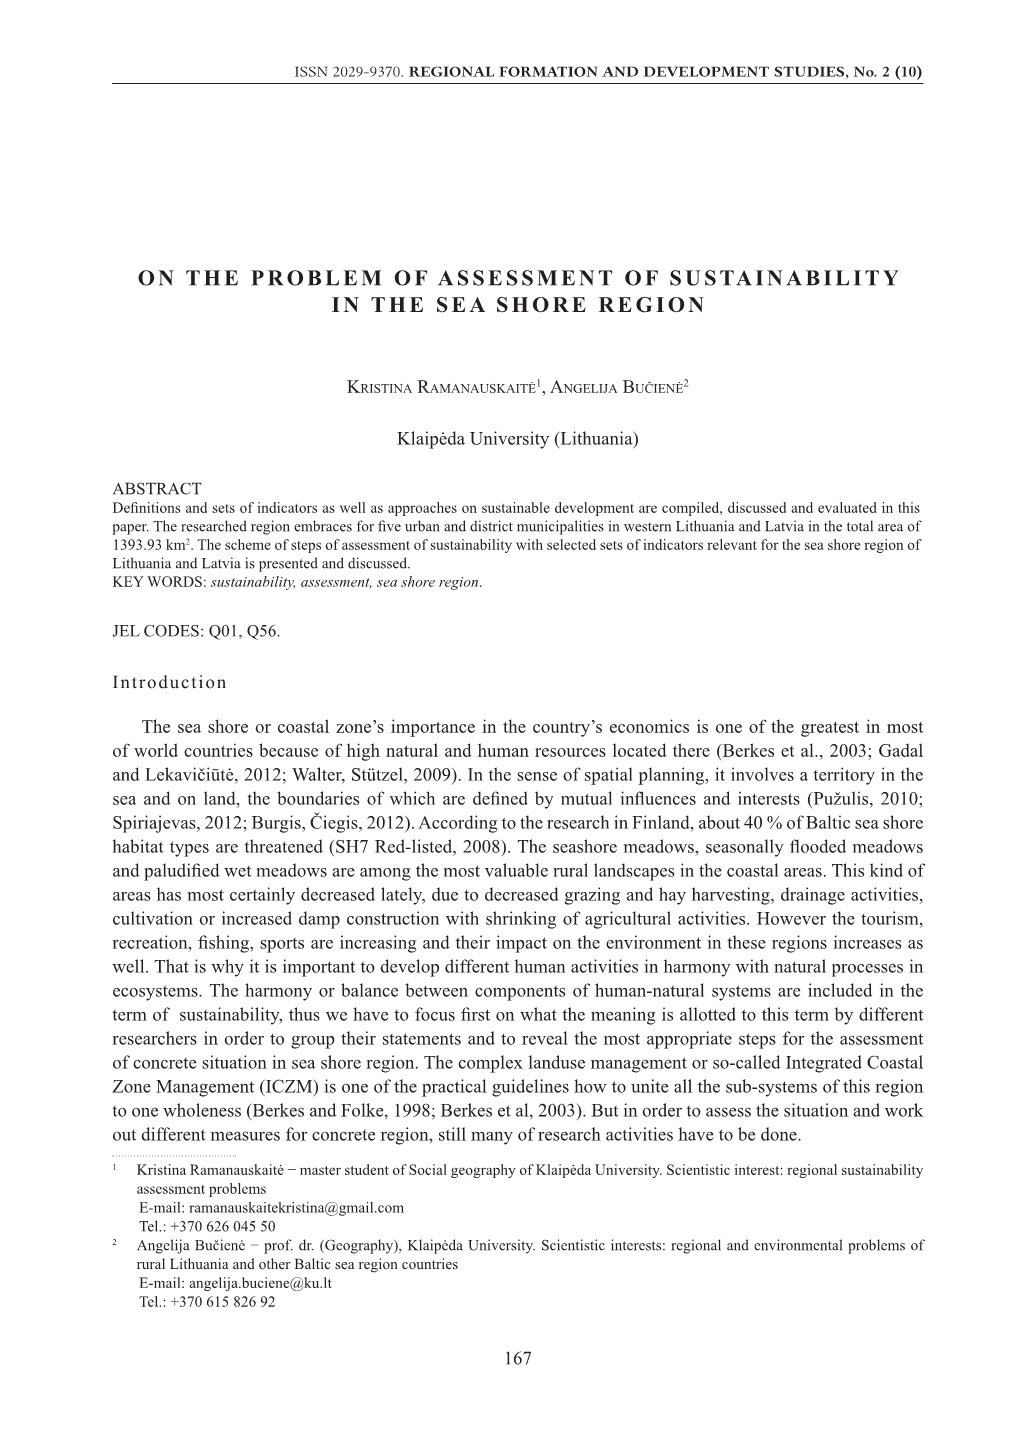 On the Problem of Assessment of Sustainability in the Sea Shore Region